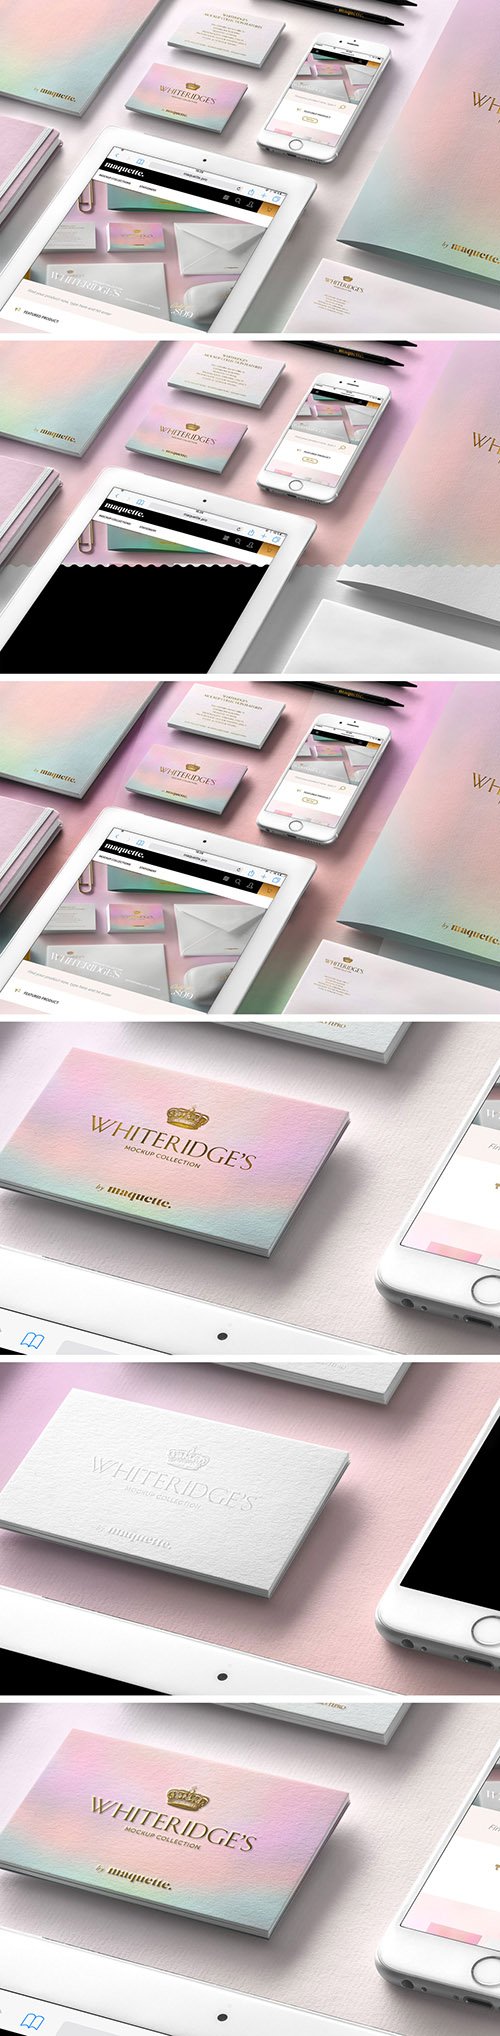 Luxury Gold-Embossed Corporate Stationery Mockup 10